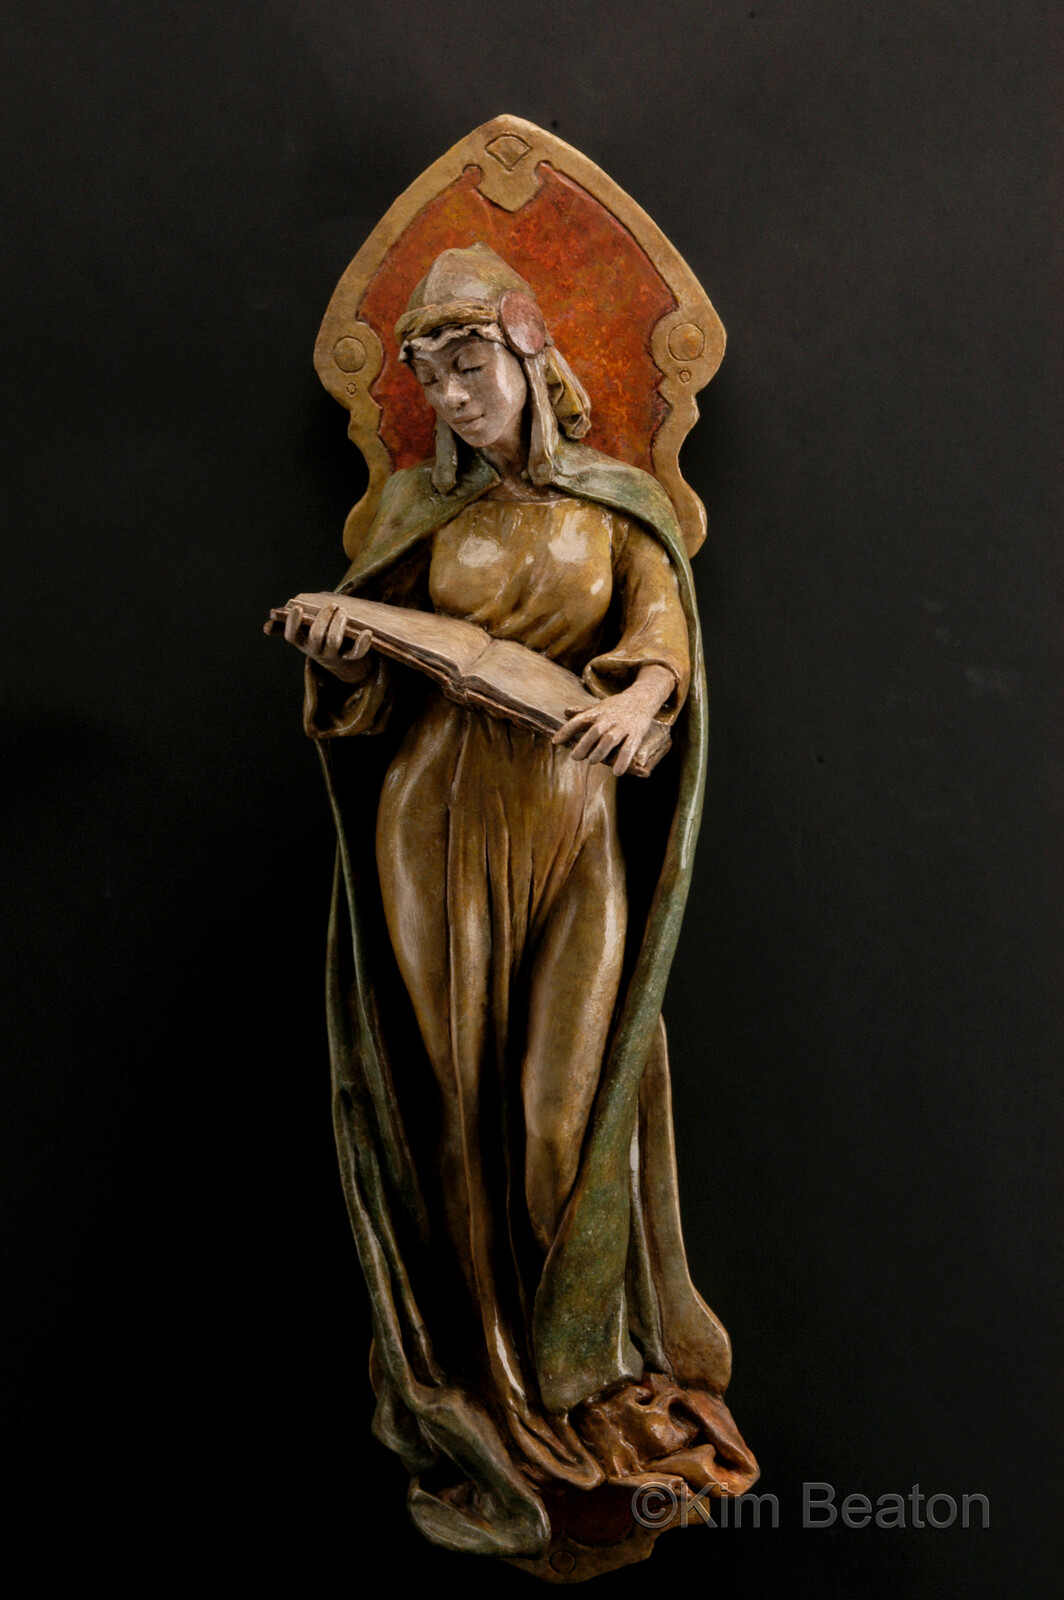 A delicate interpretation of medieval church icons. 2004.
Fired Ceramic and lacquer paint.